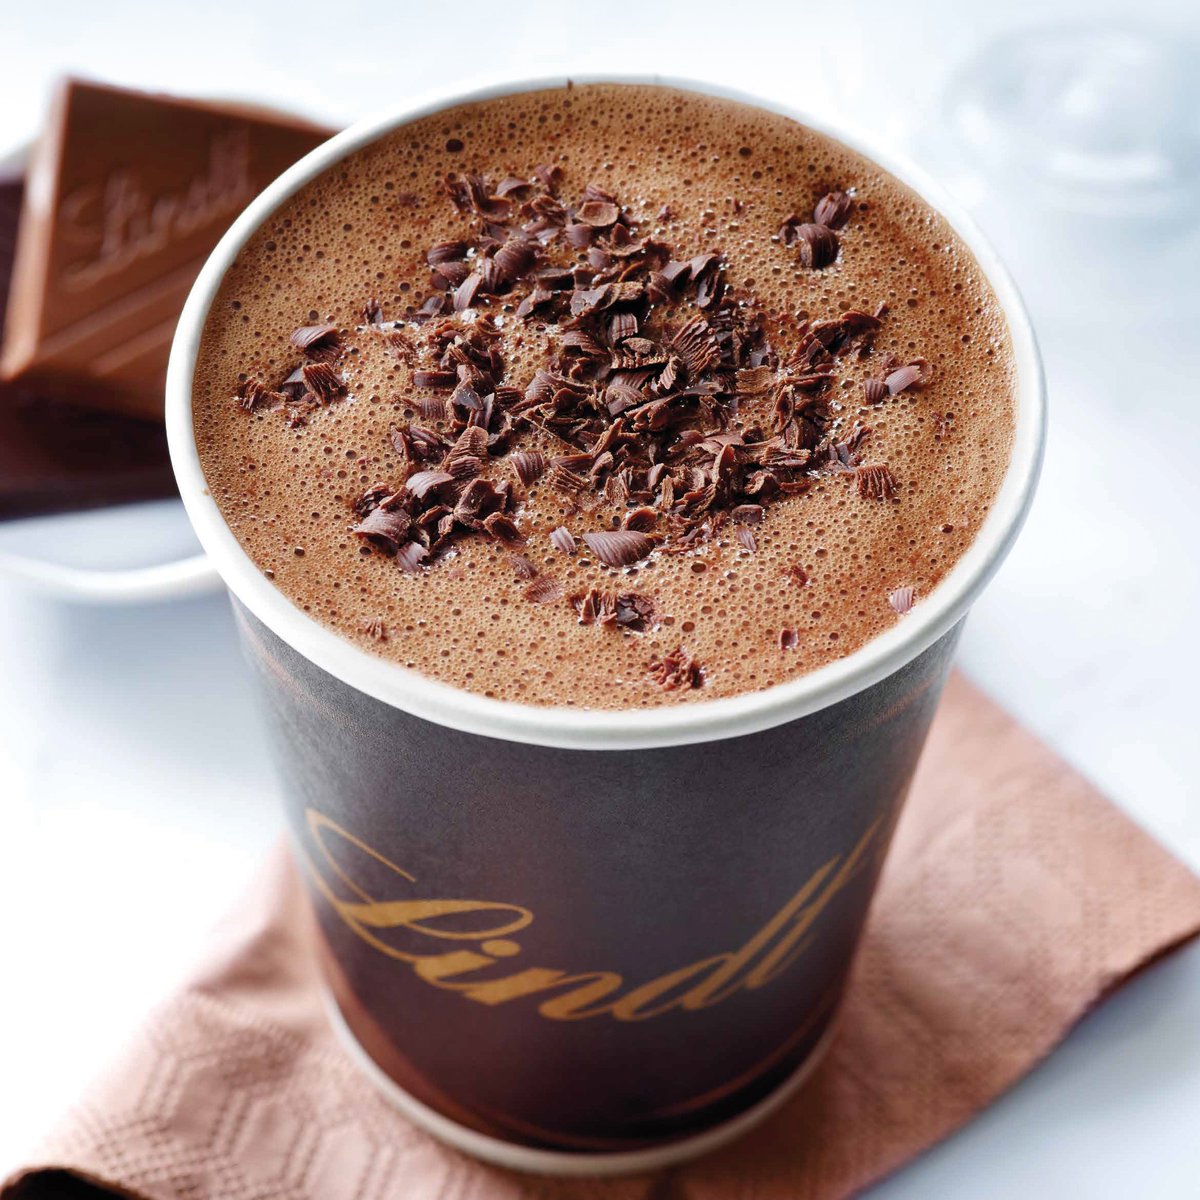 Attention chocoholics! 🍫 The Lindt shop @GunwharfQuays has reopened today with a UK exclusive - the Chocolate Bar. The bar serves a menu of signature hot drinks, made from its unique 'chocolate tap'. ☕️